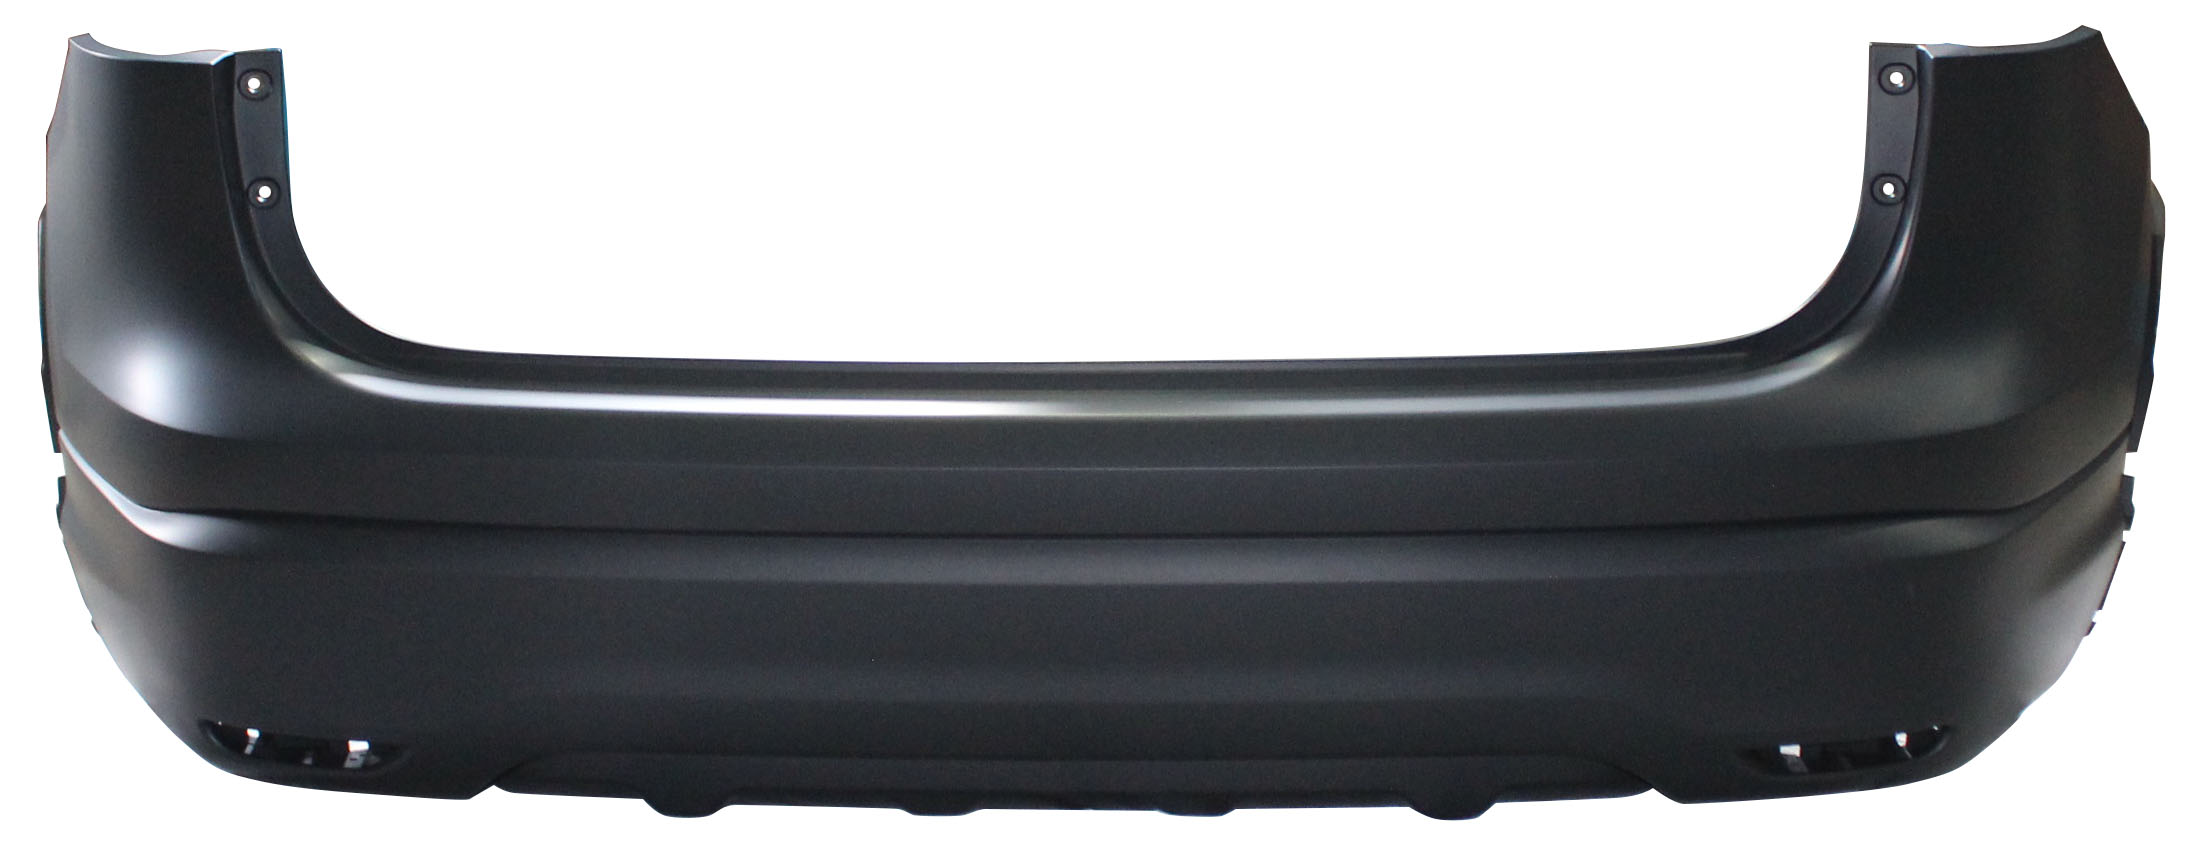 Aftermarket BUMPER COVERS for NISSAN - ROGUE SPORT, ROGUE SPORT,17-18,Rear bumper cover